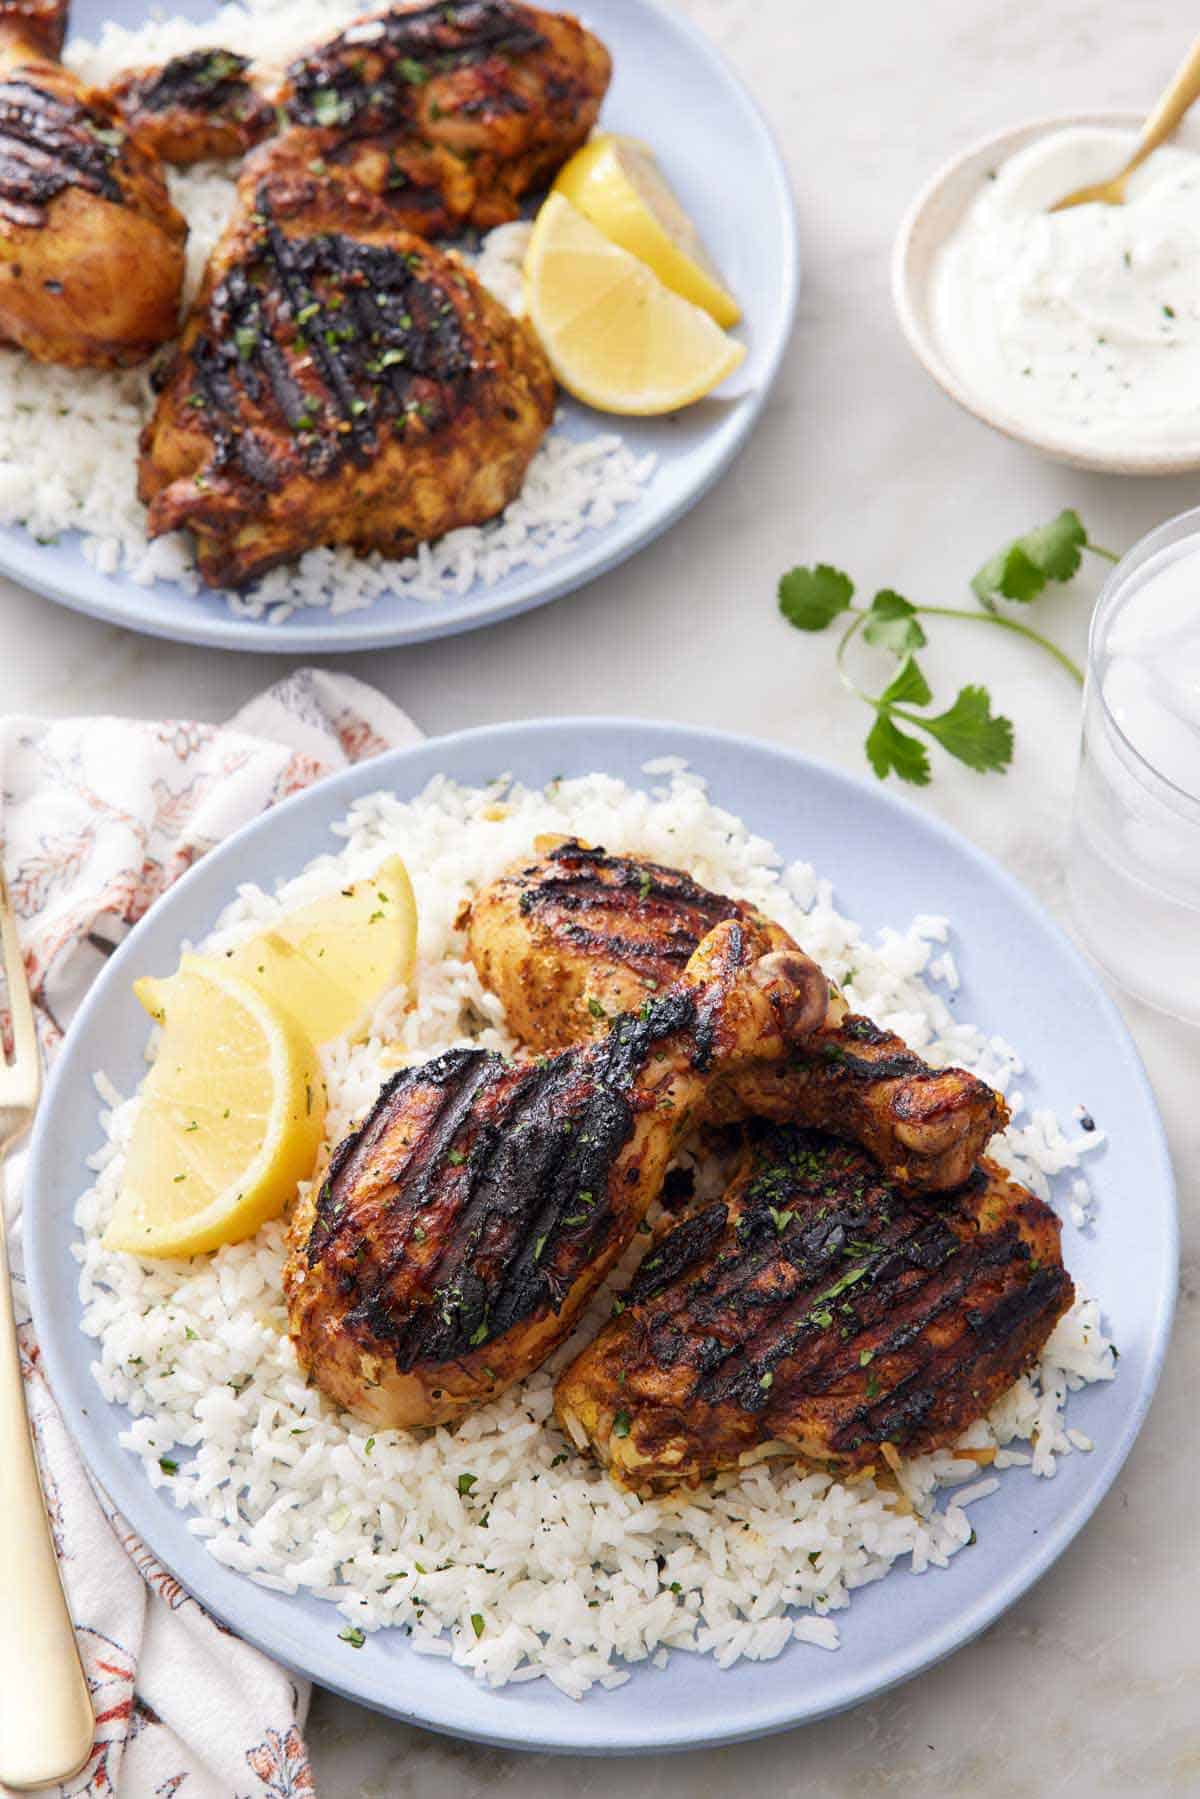 A plate with tandoori chicken over a bed of rice with lemon wedges. A second plate in the back along with a white sauce.